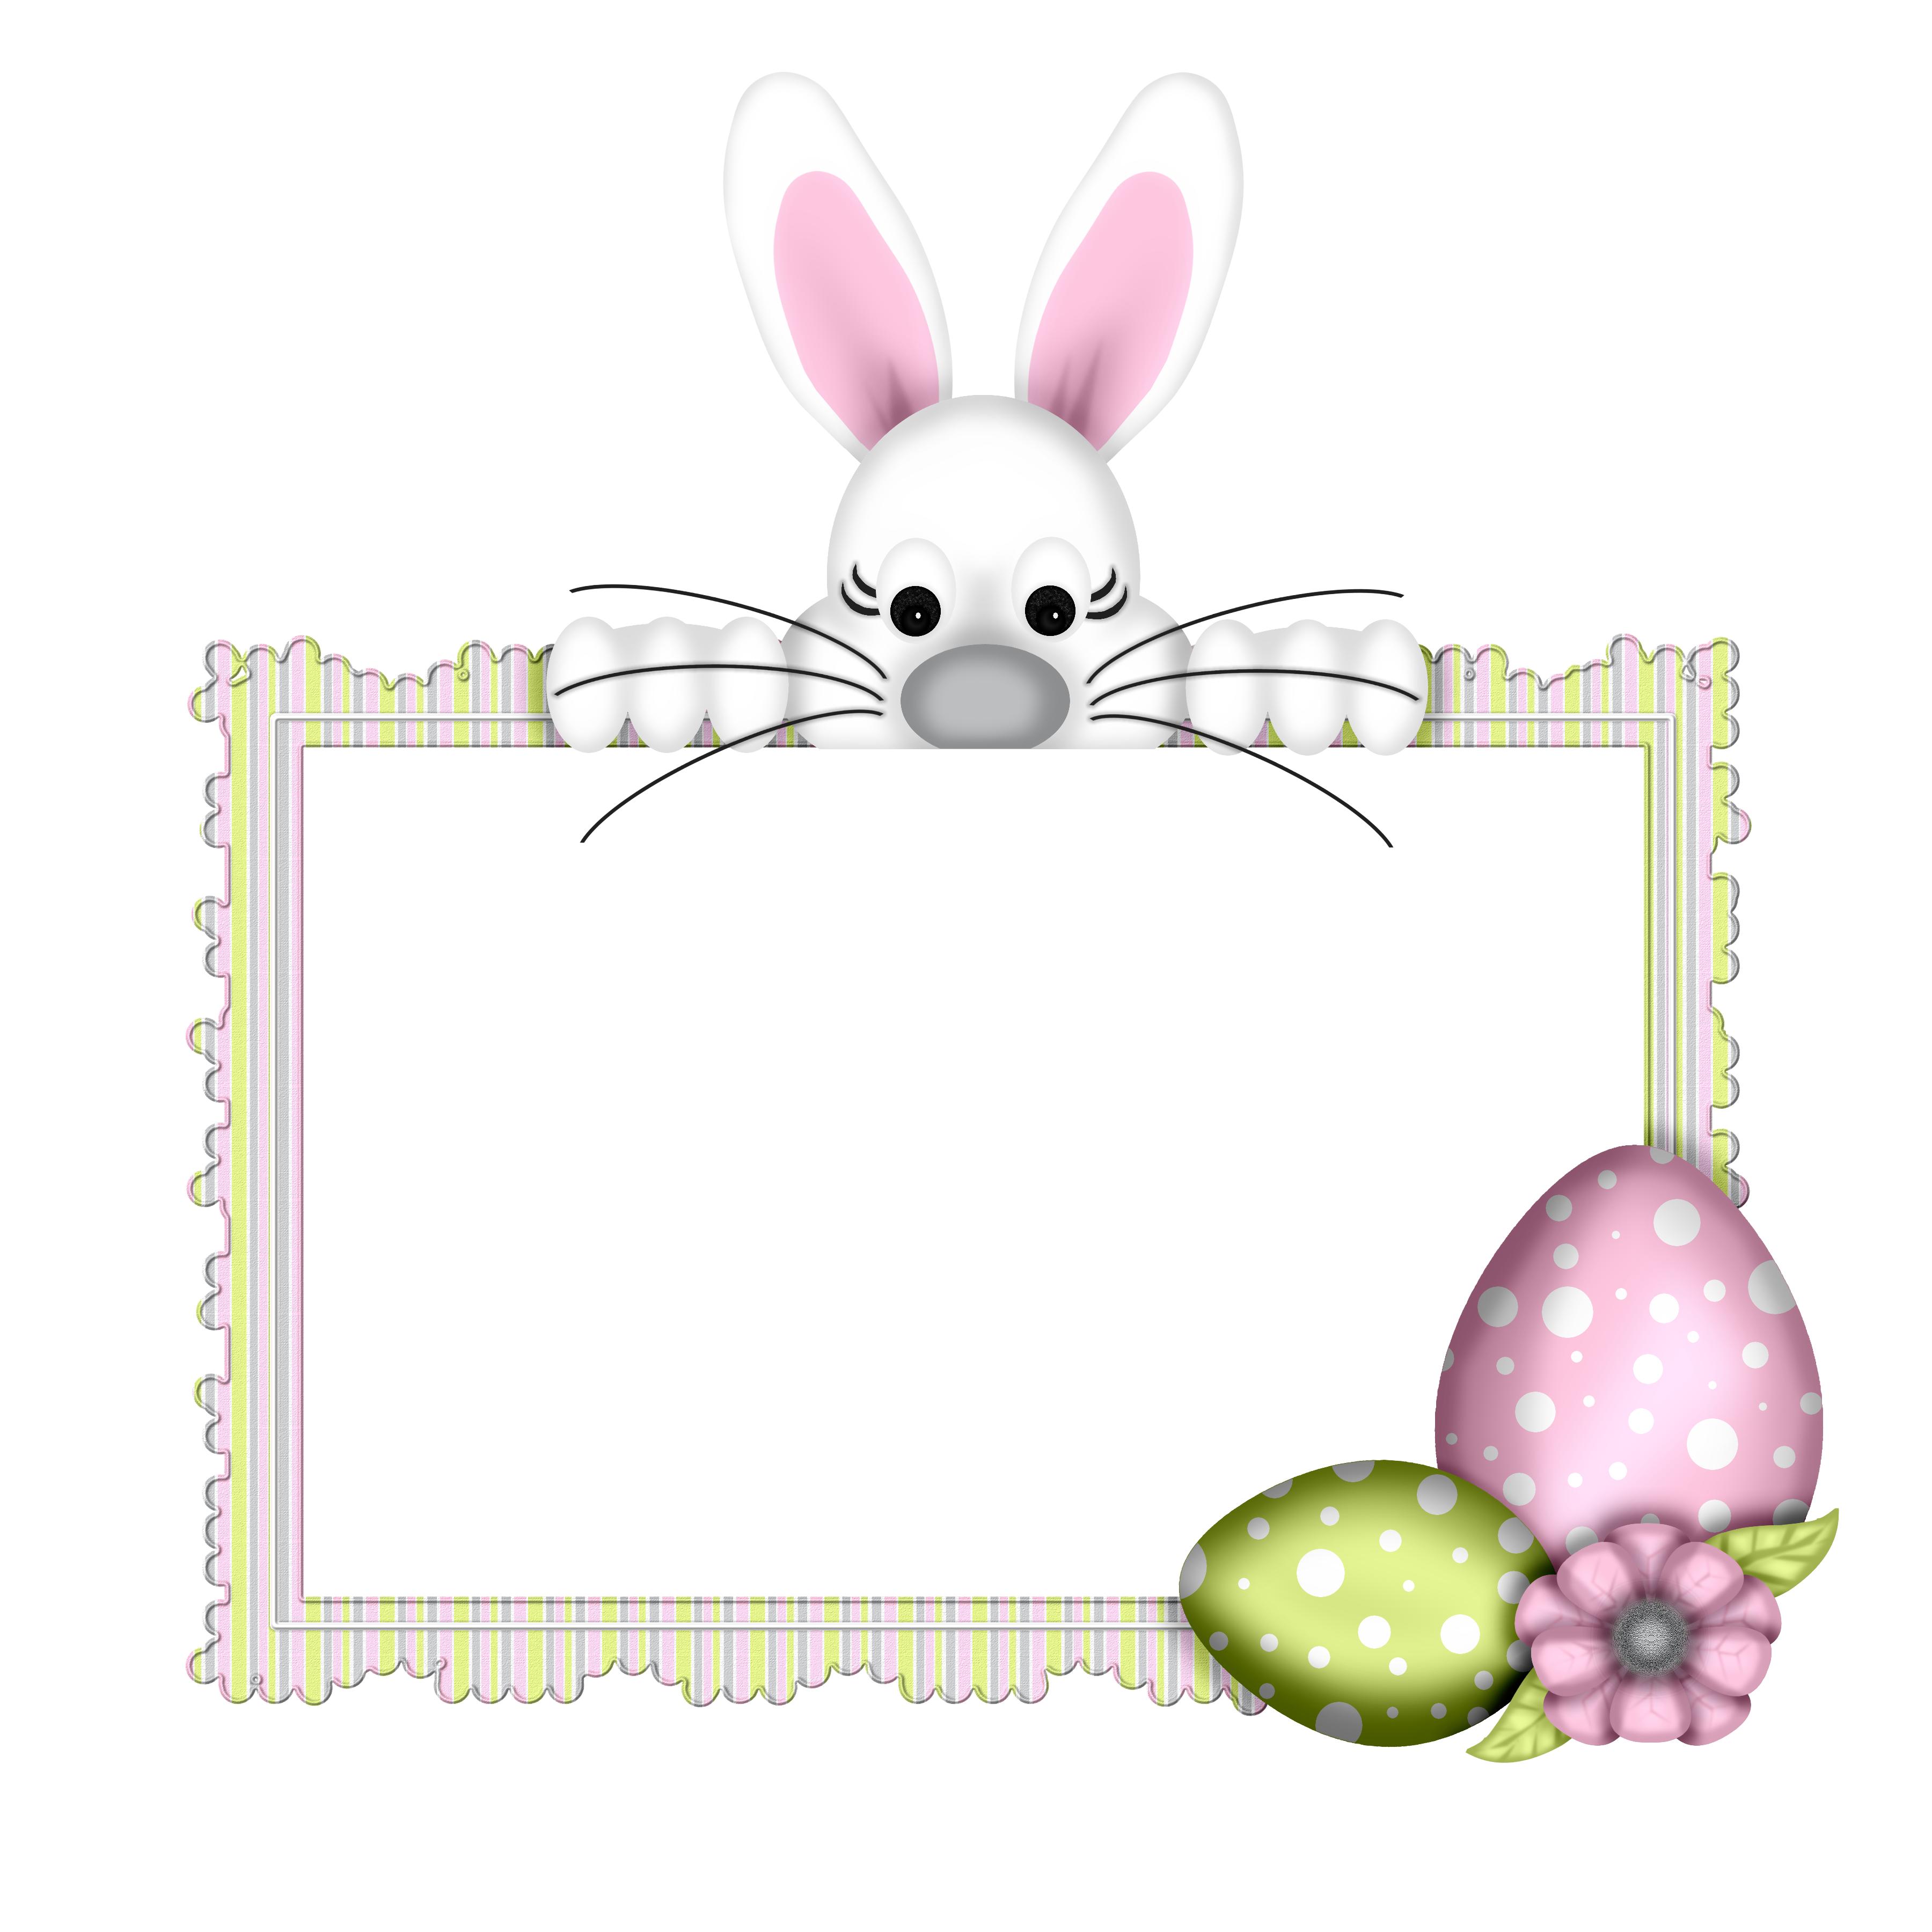 Bunnies Hare Easter Photography Egg Bunny PNG Image